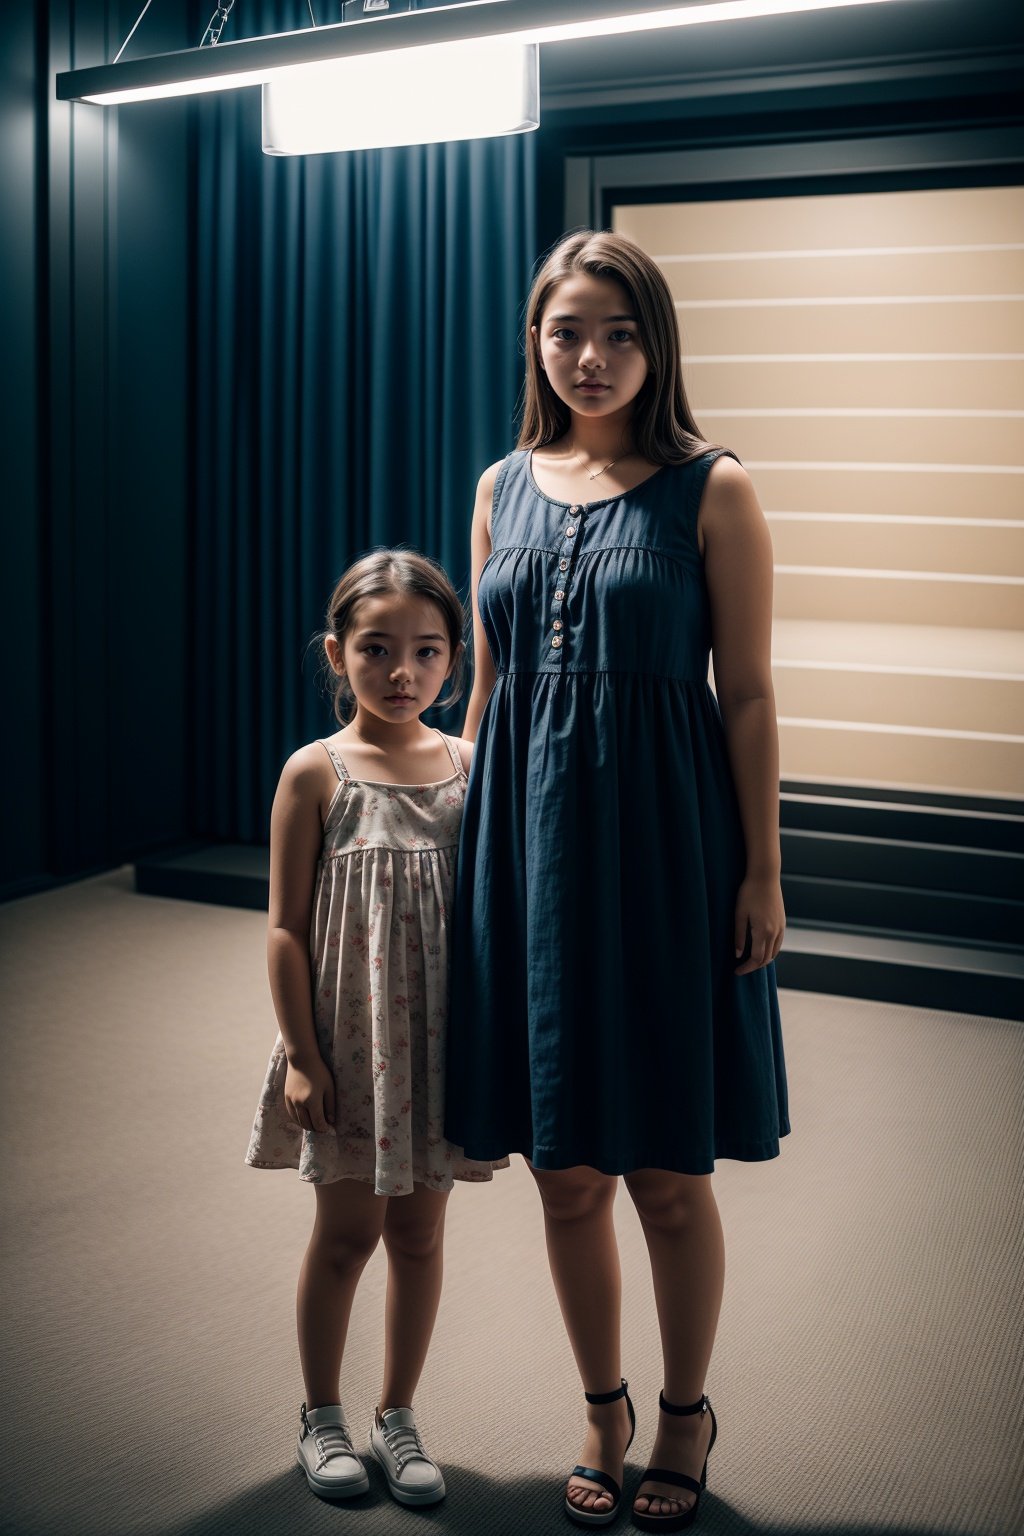 A 16 years old girl, baby dress, standing next to her mother, cinema lighting 